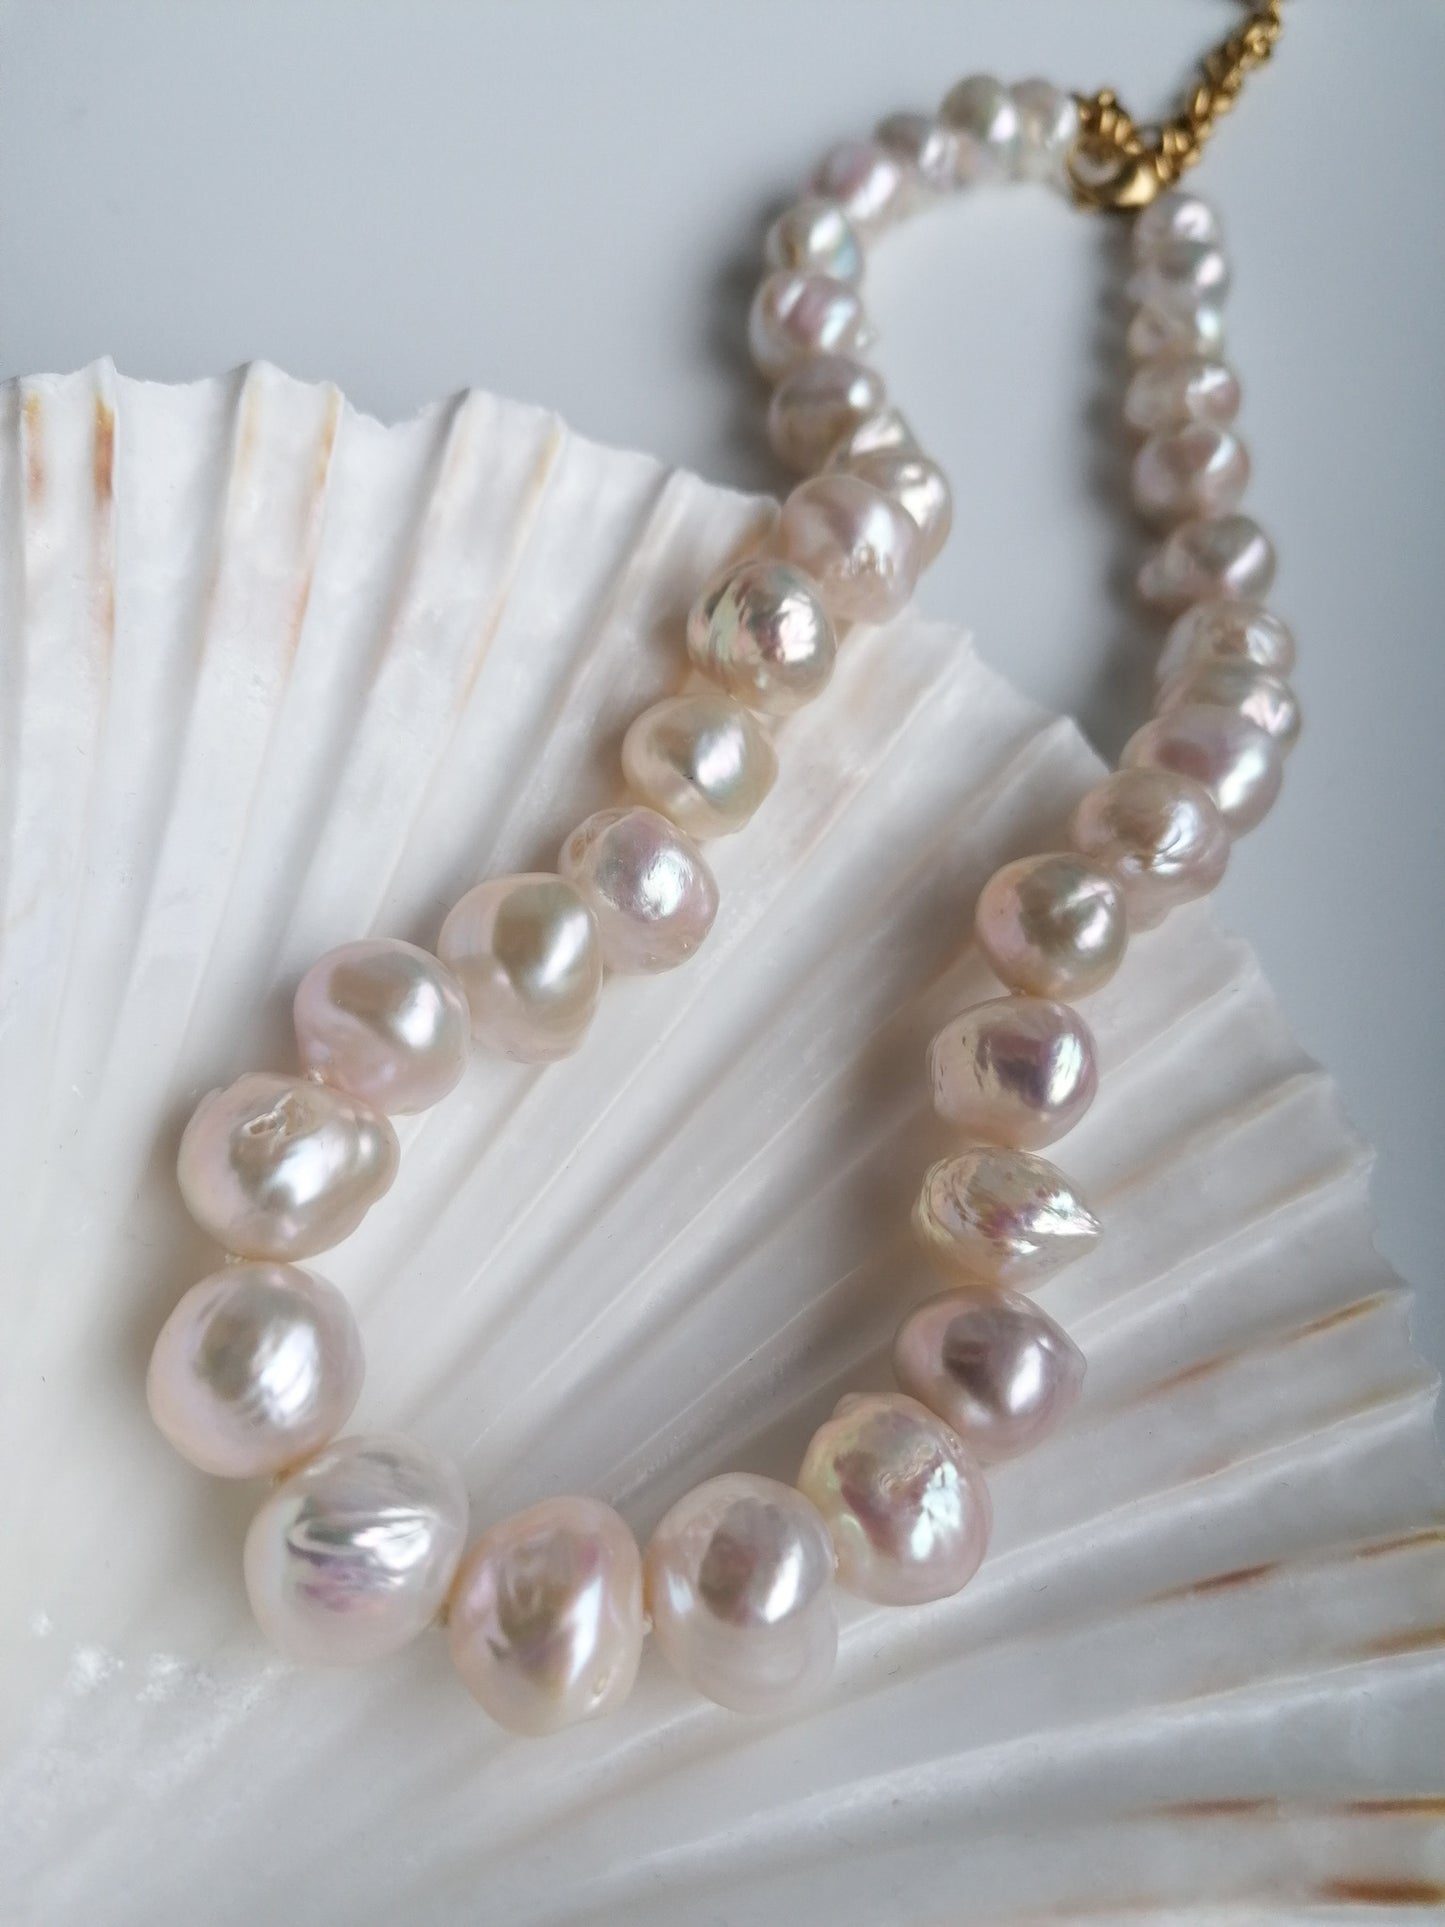 Giant Edison pearl necklace